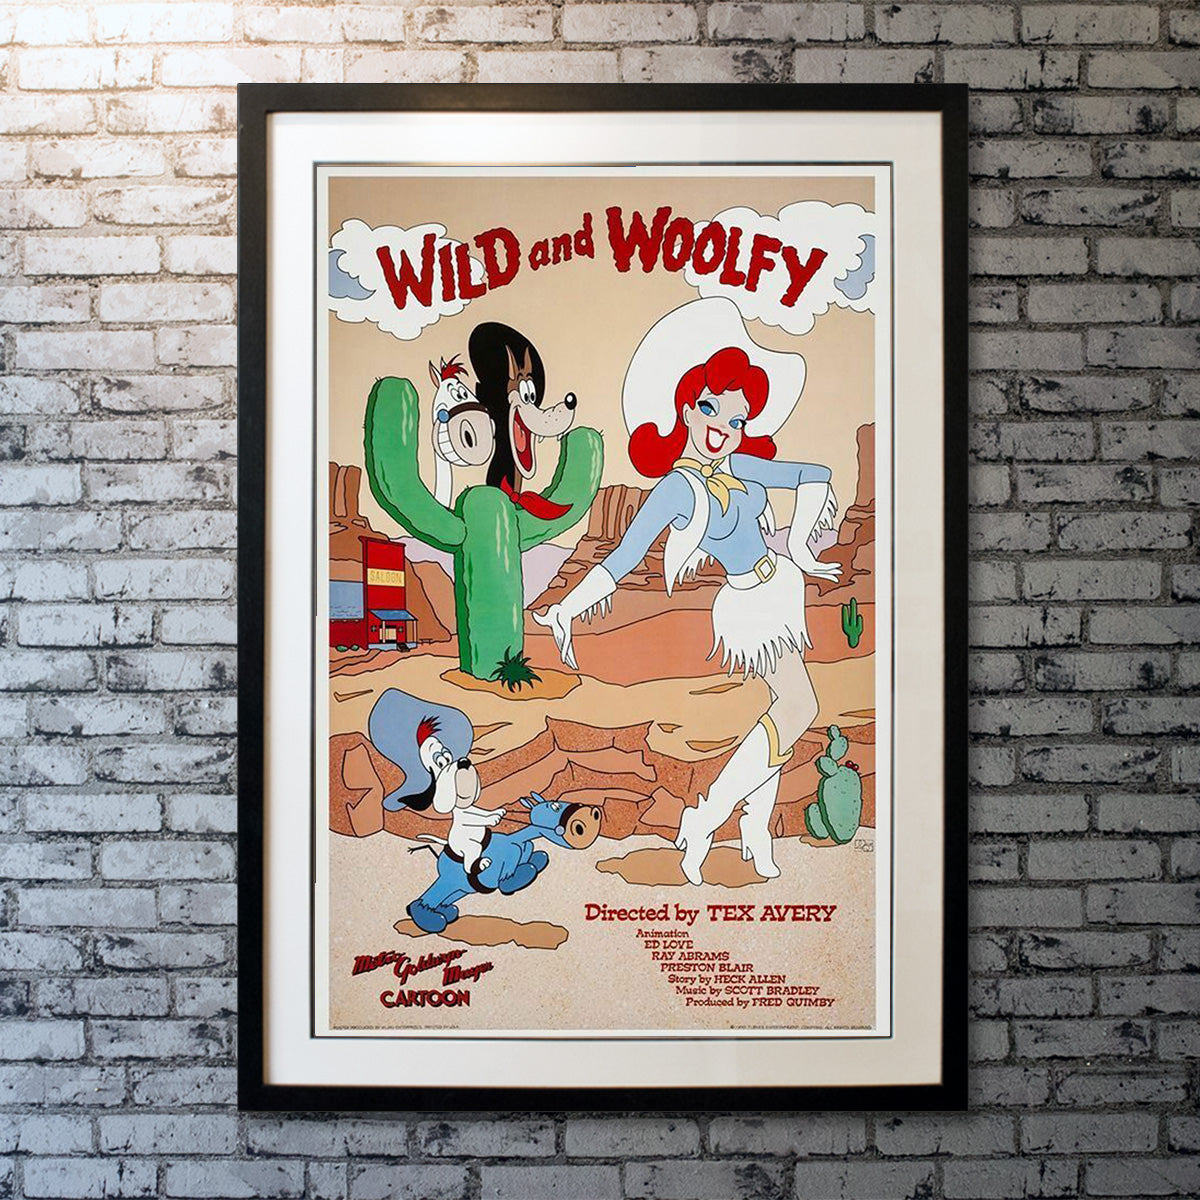 Original Movie Poster of Wild And Woolfy (1990)